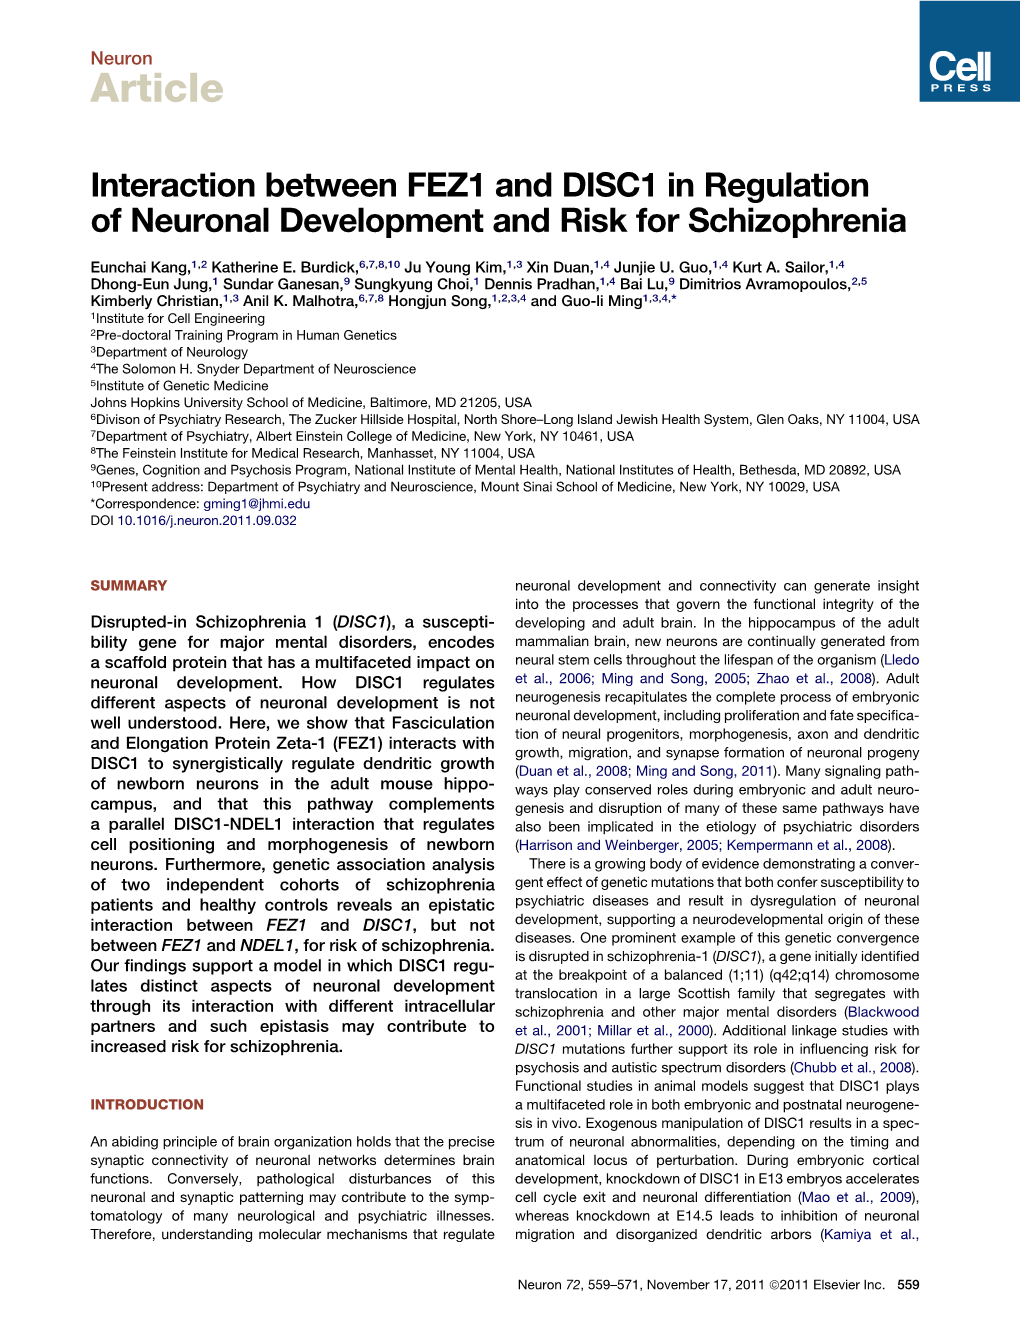 Interaction Between FEZ1 and DISC1 in Regulation of Neuronal Development and Risk for Schizophrenia